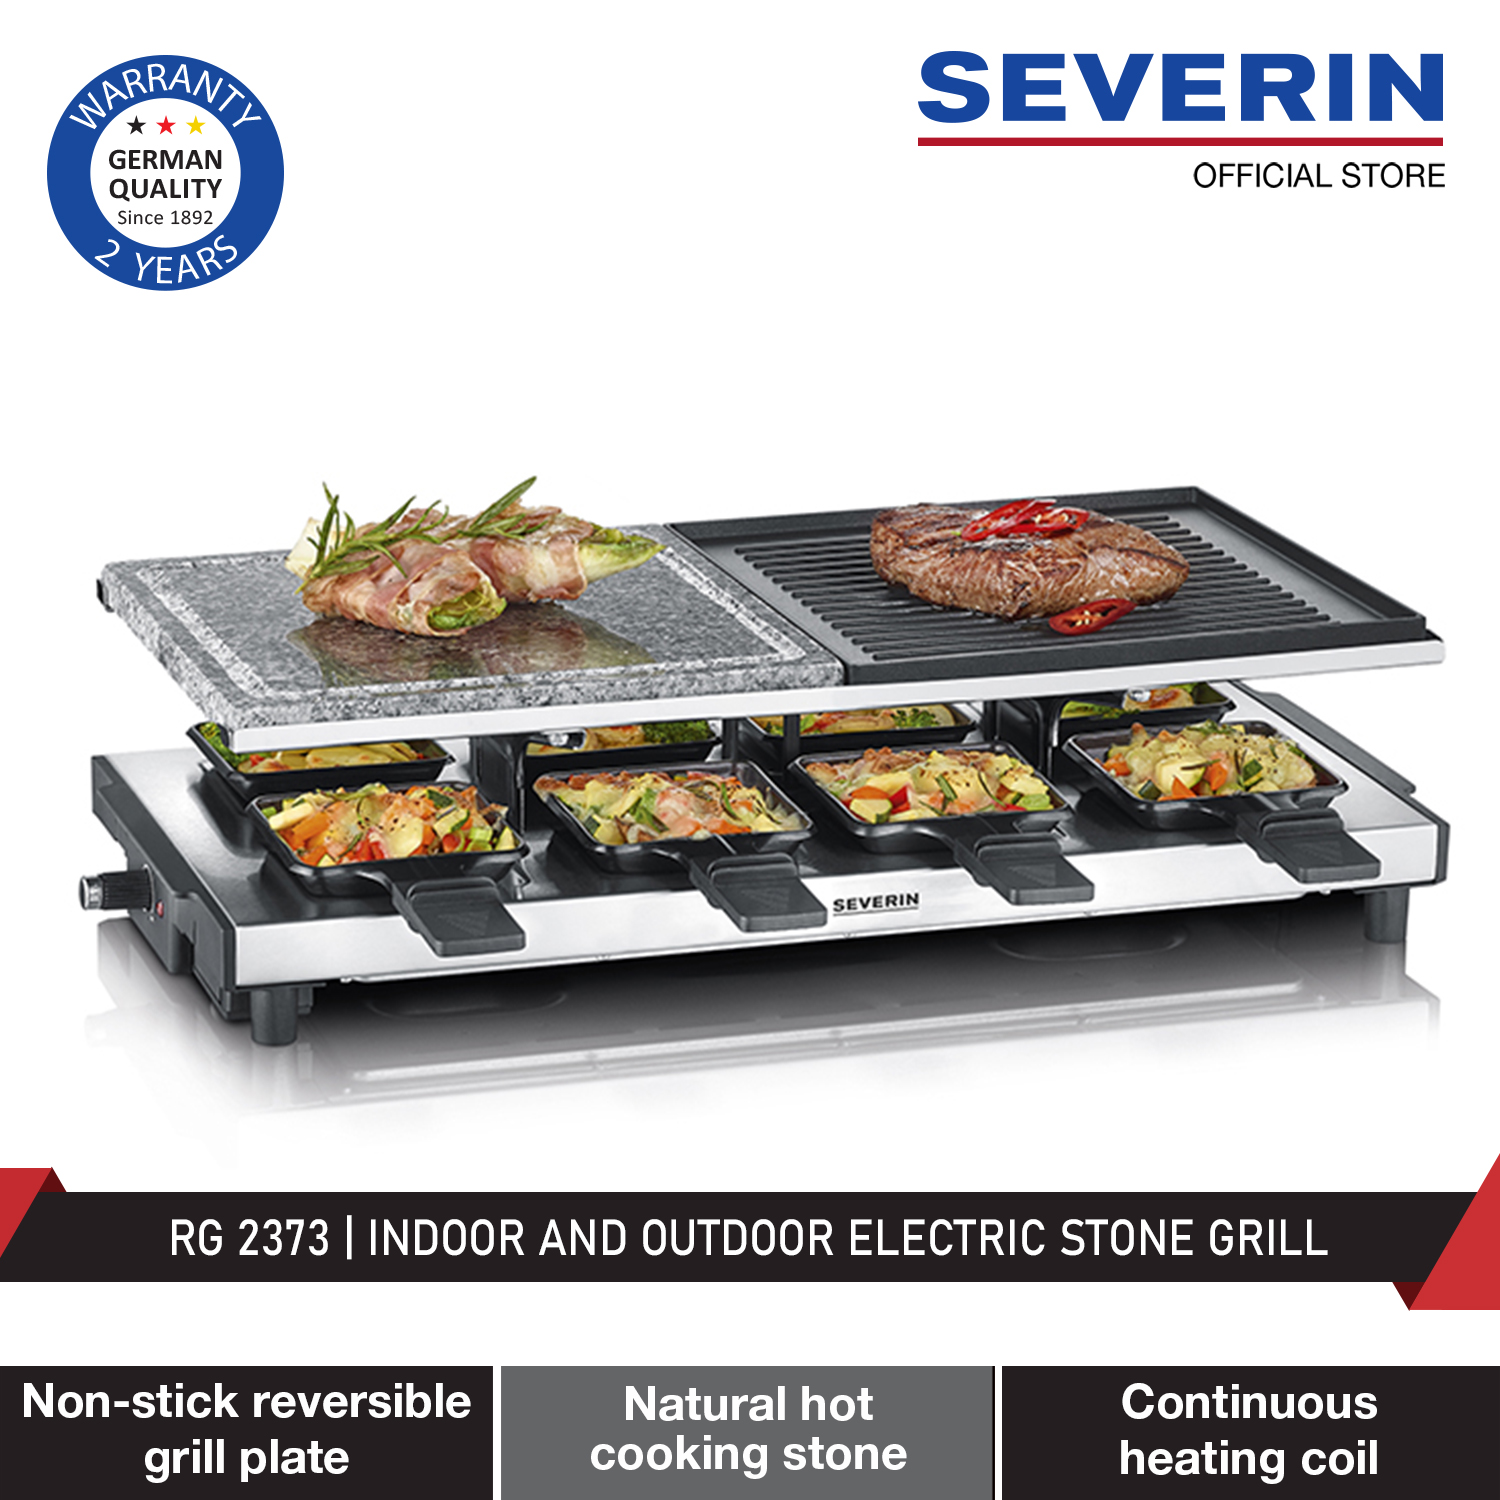 Severin RG 2373 Smokeless Odourless Indoor and Electric Natural Stone Grill Year Warranty | Lazada Singapore